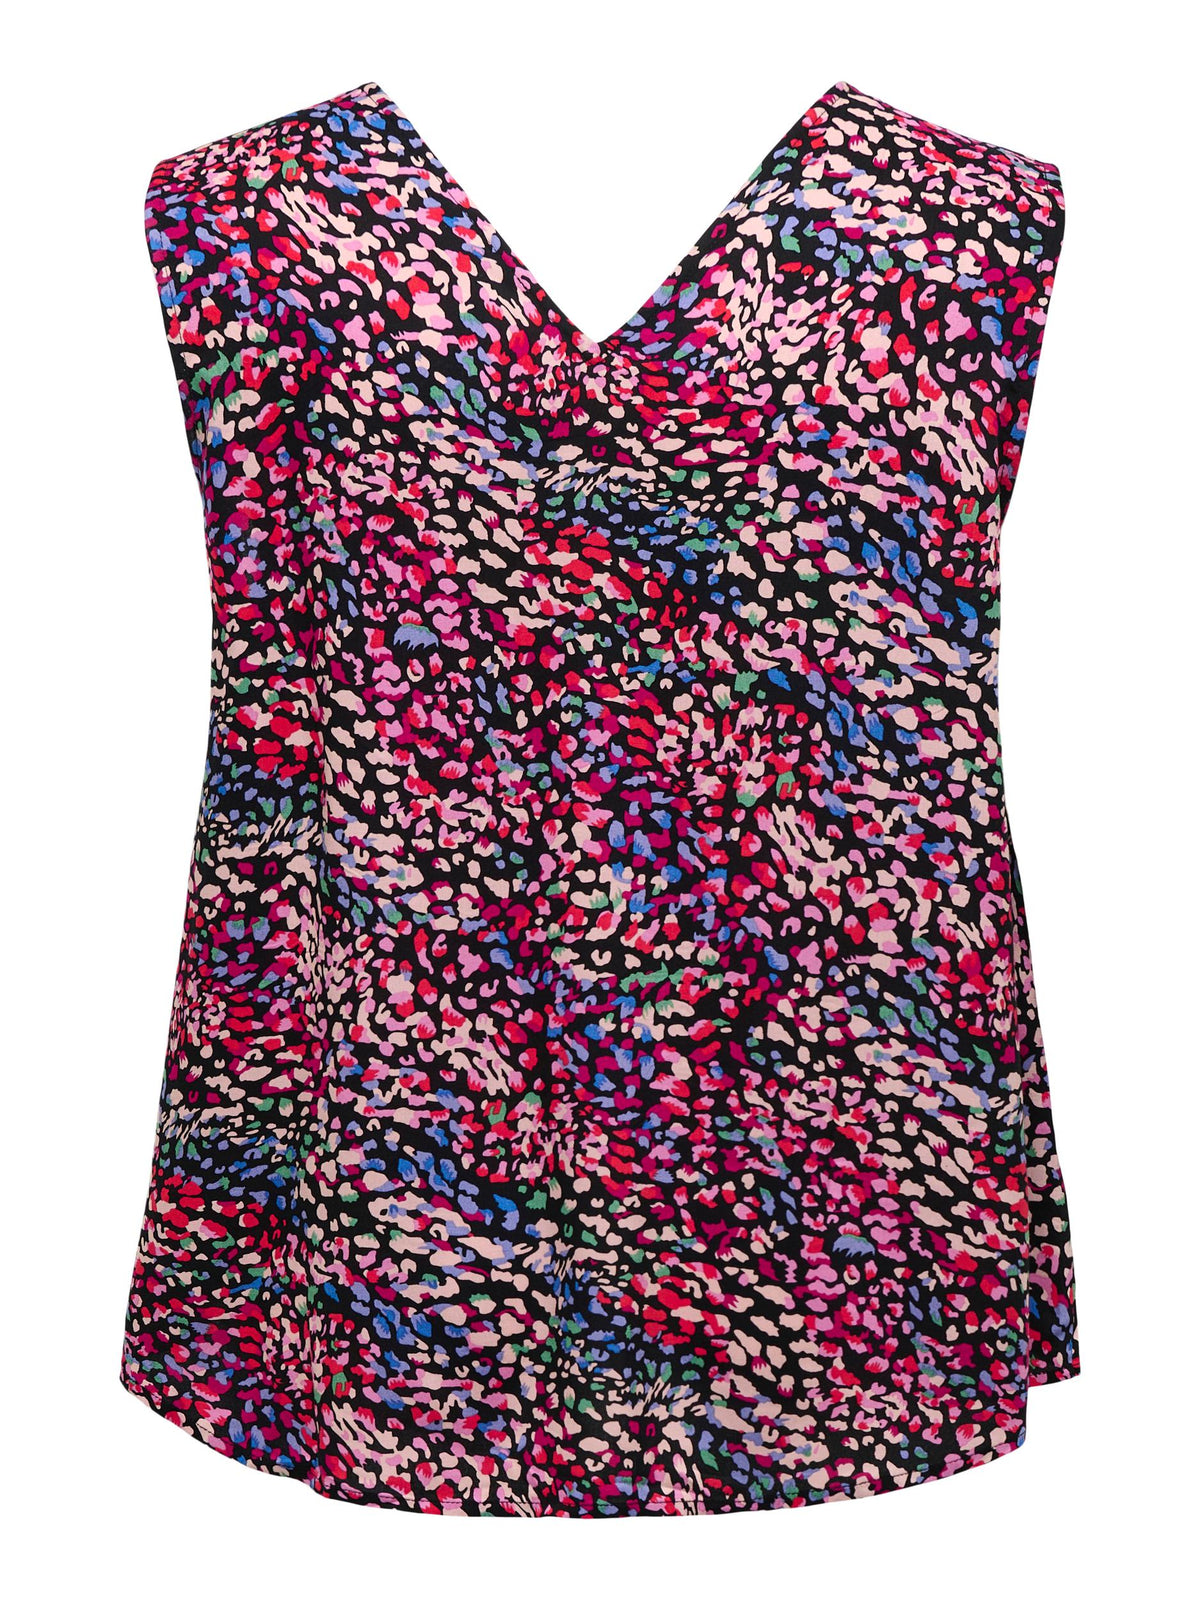 Only Carmakoma Sleeveless Top in Dancing Print